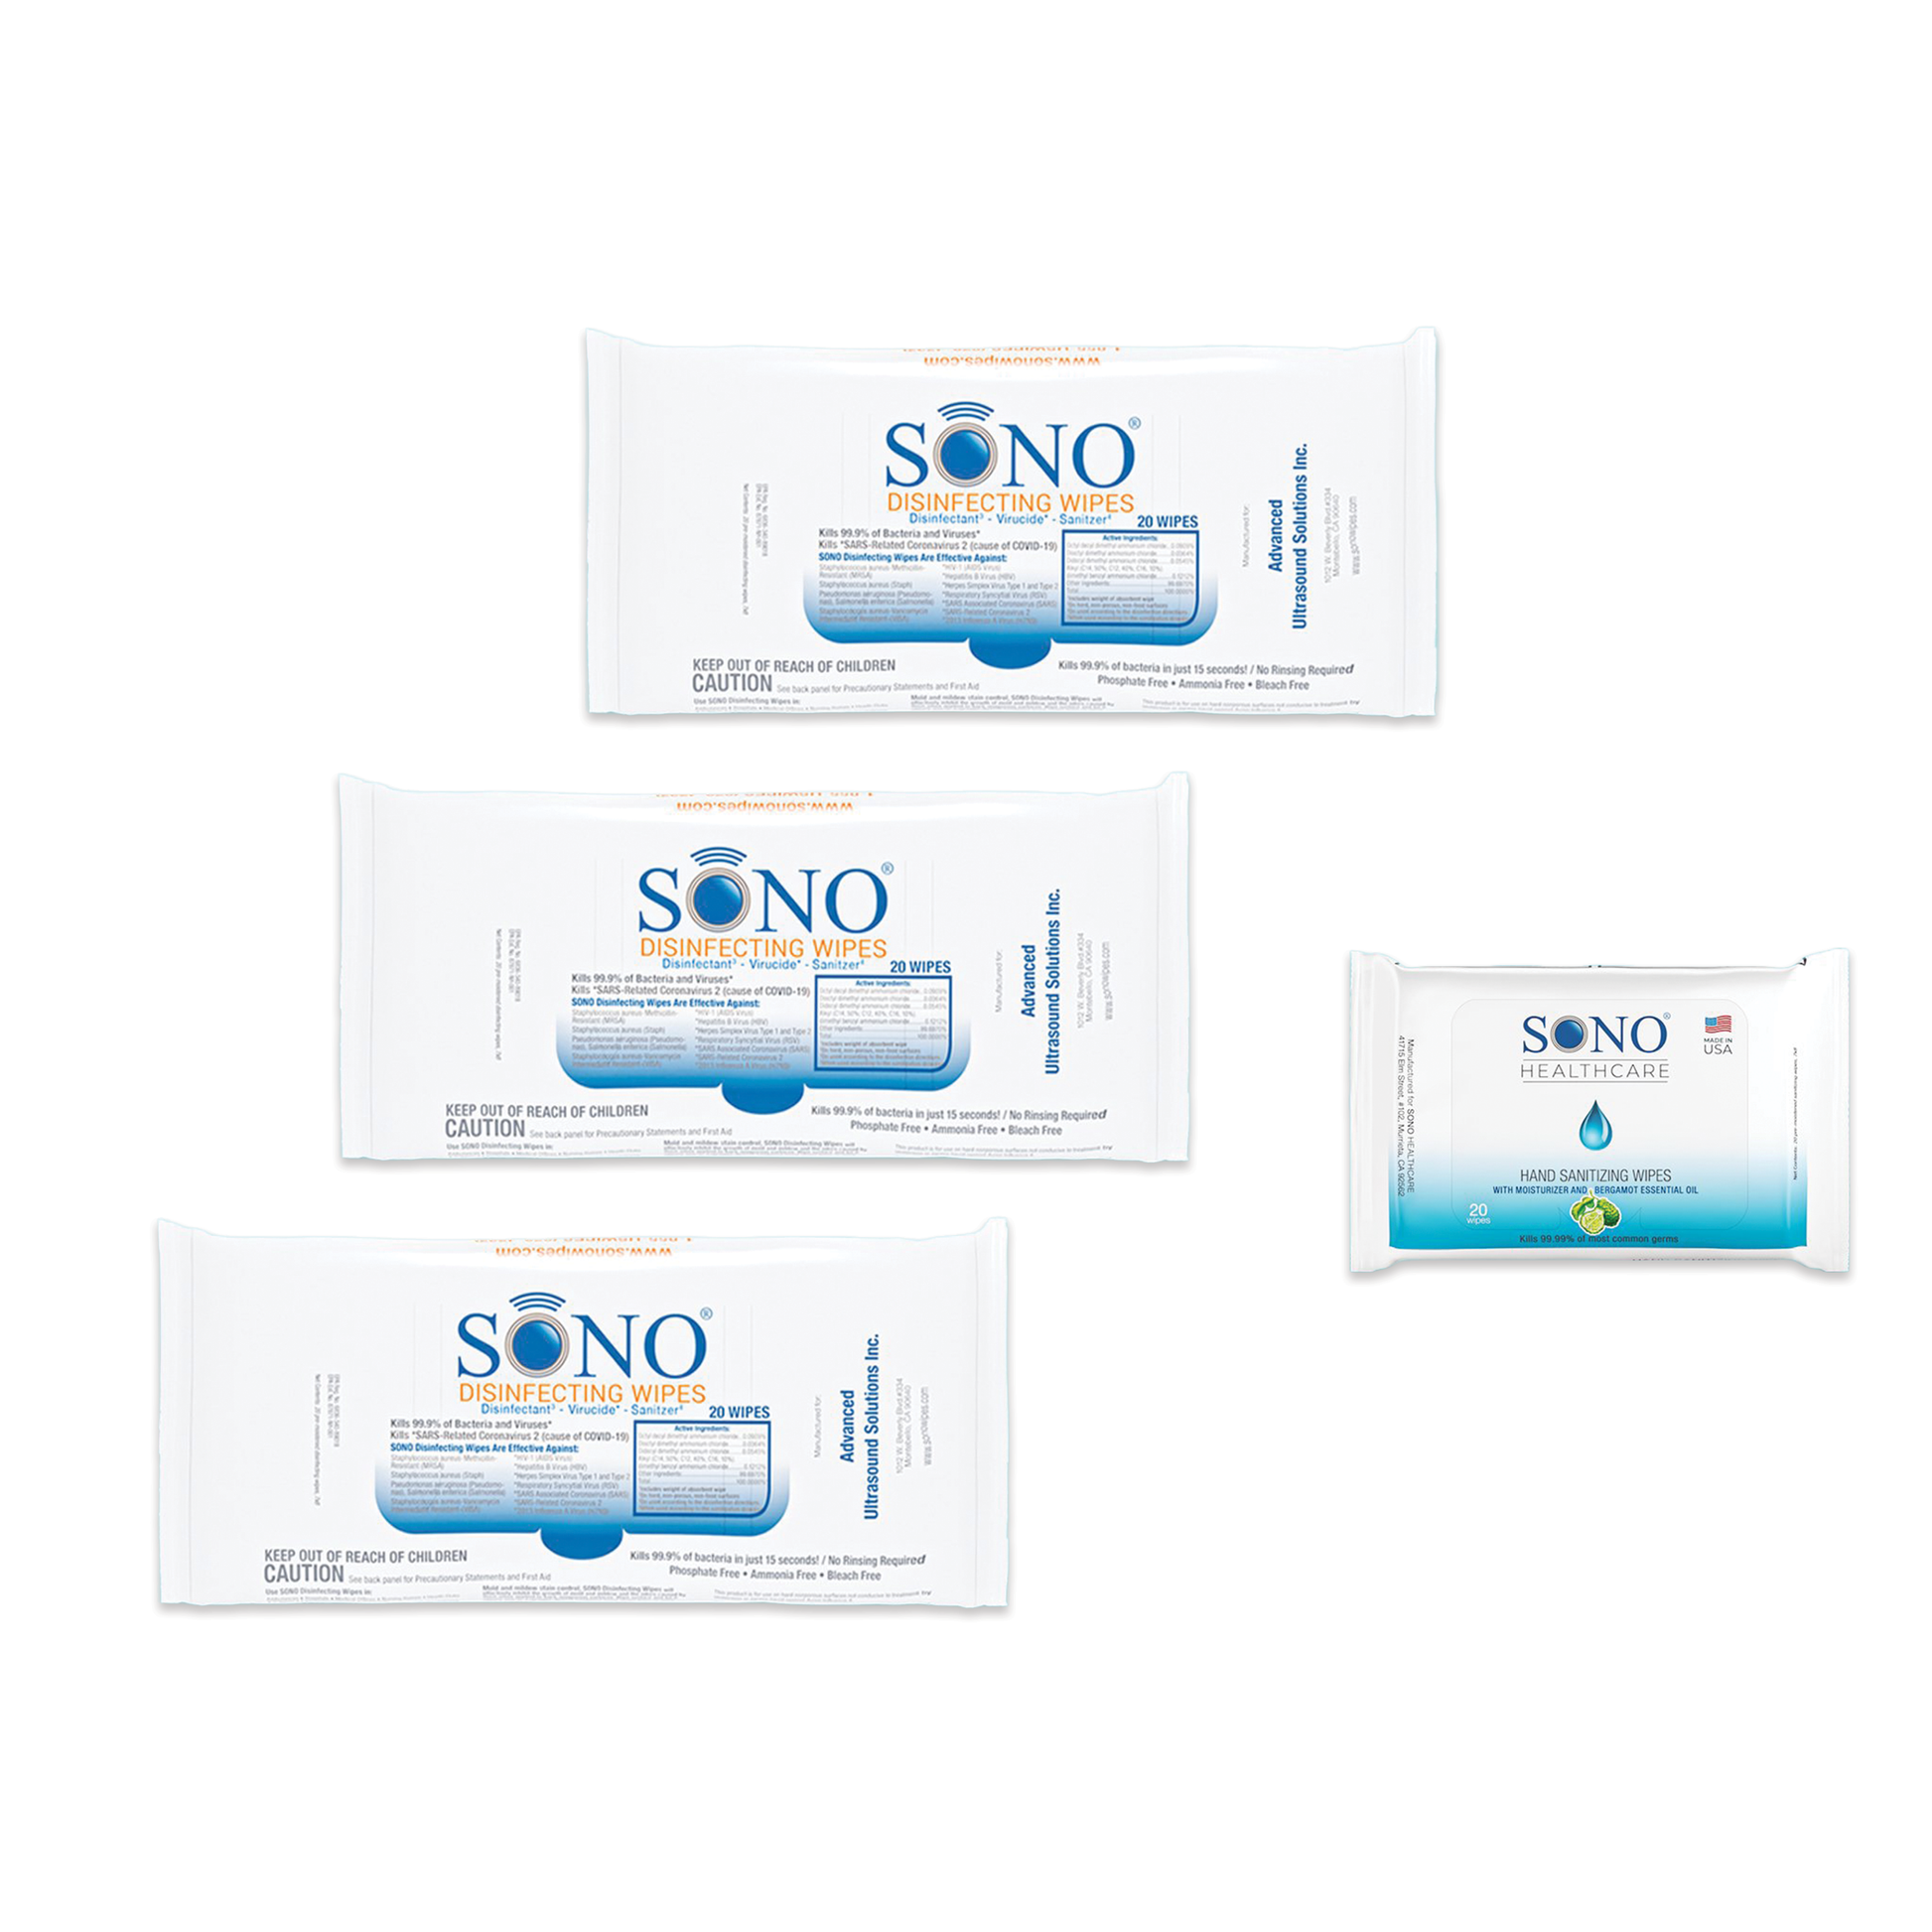 Close-up of SONO Travel Safe Disinfecting Wipes, showcasing the compact and travel-friendly packaging.